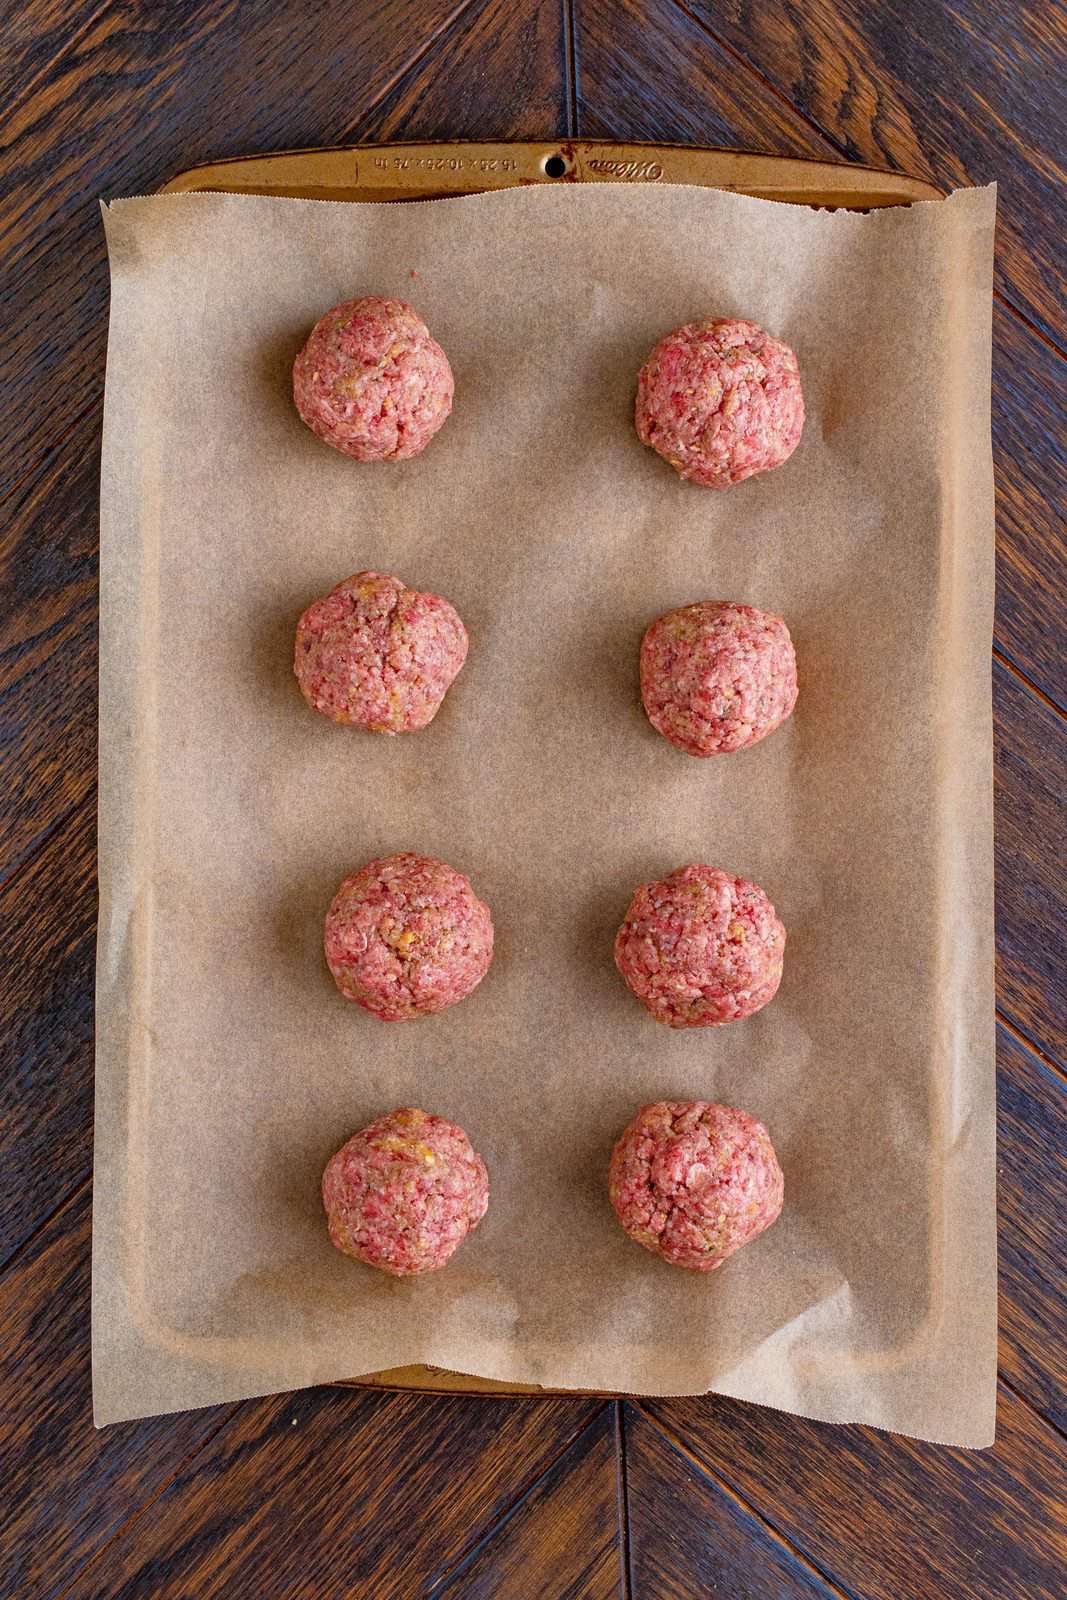 Meat mixture rolled into meatballs and placed on parchment lined baking sheet.